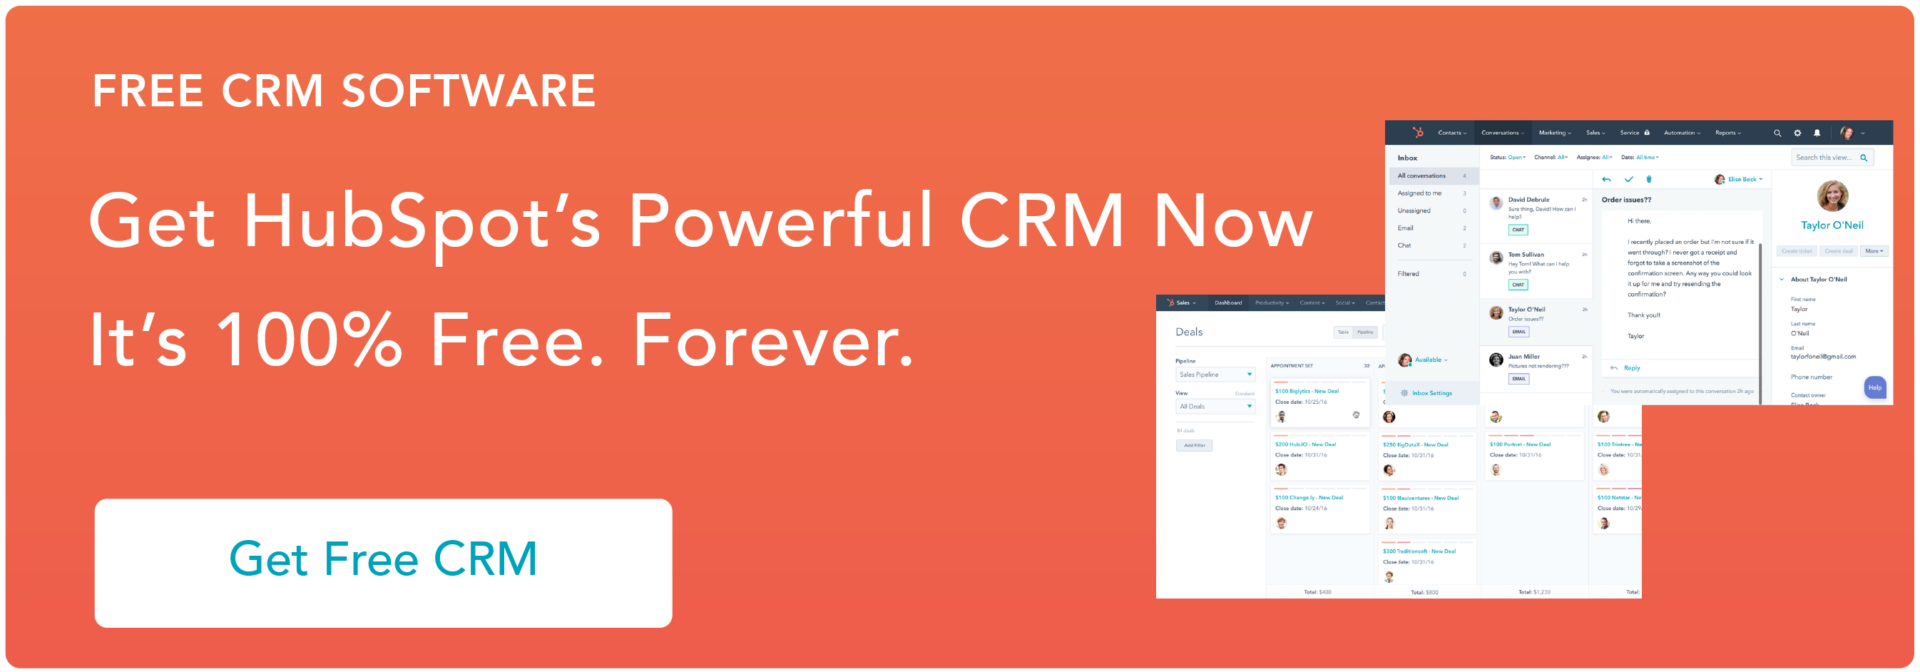 crm software free